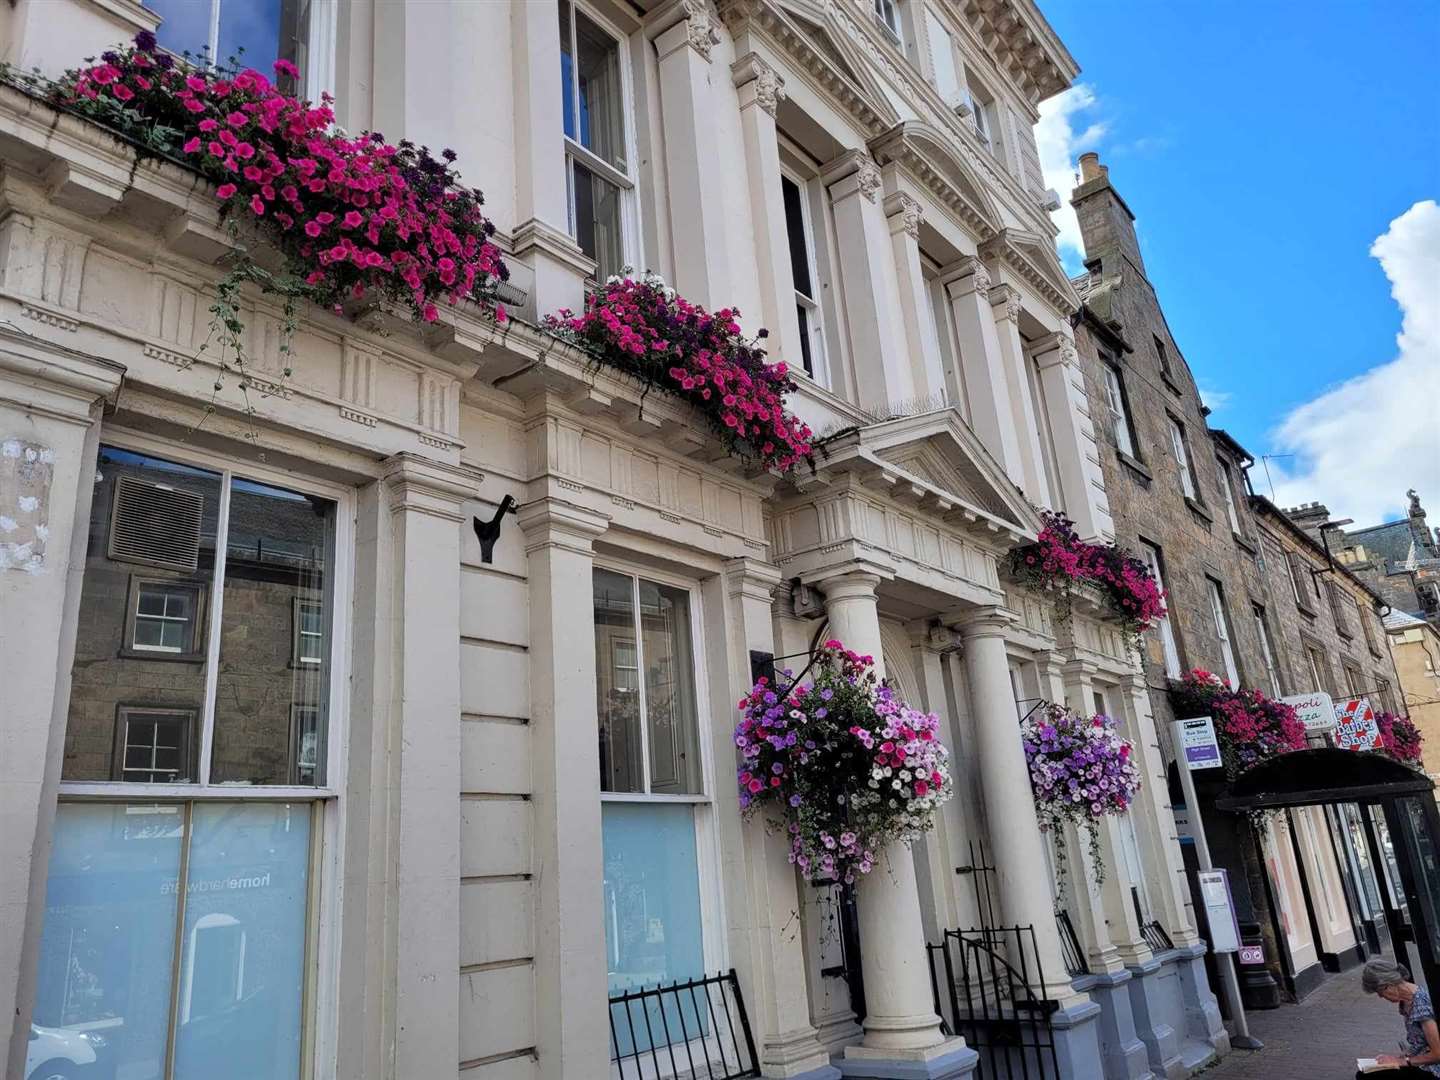 The former bank at 102 High Street decorated by Forres In Bloom this summer.